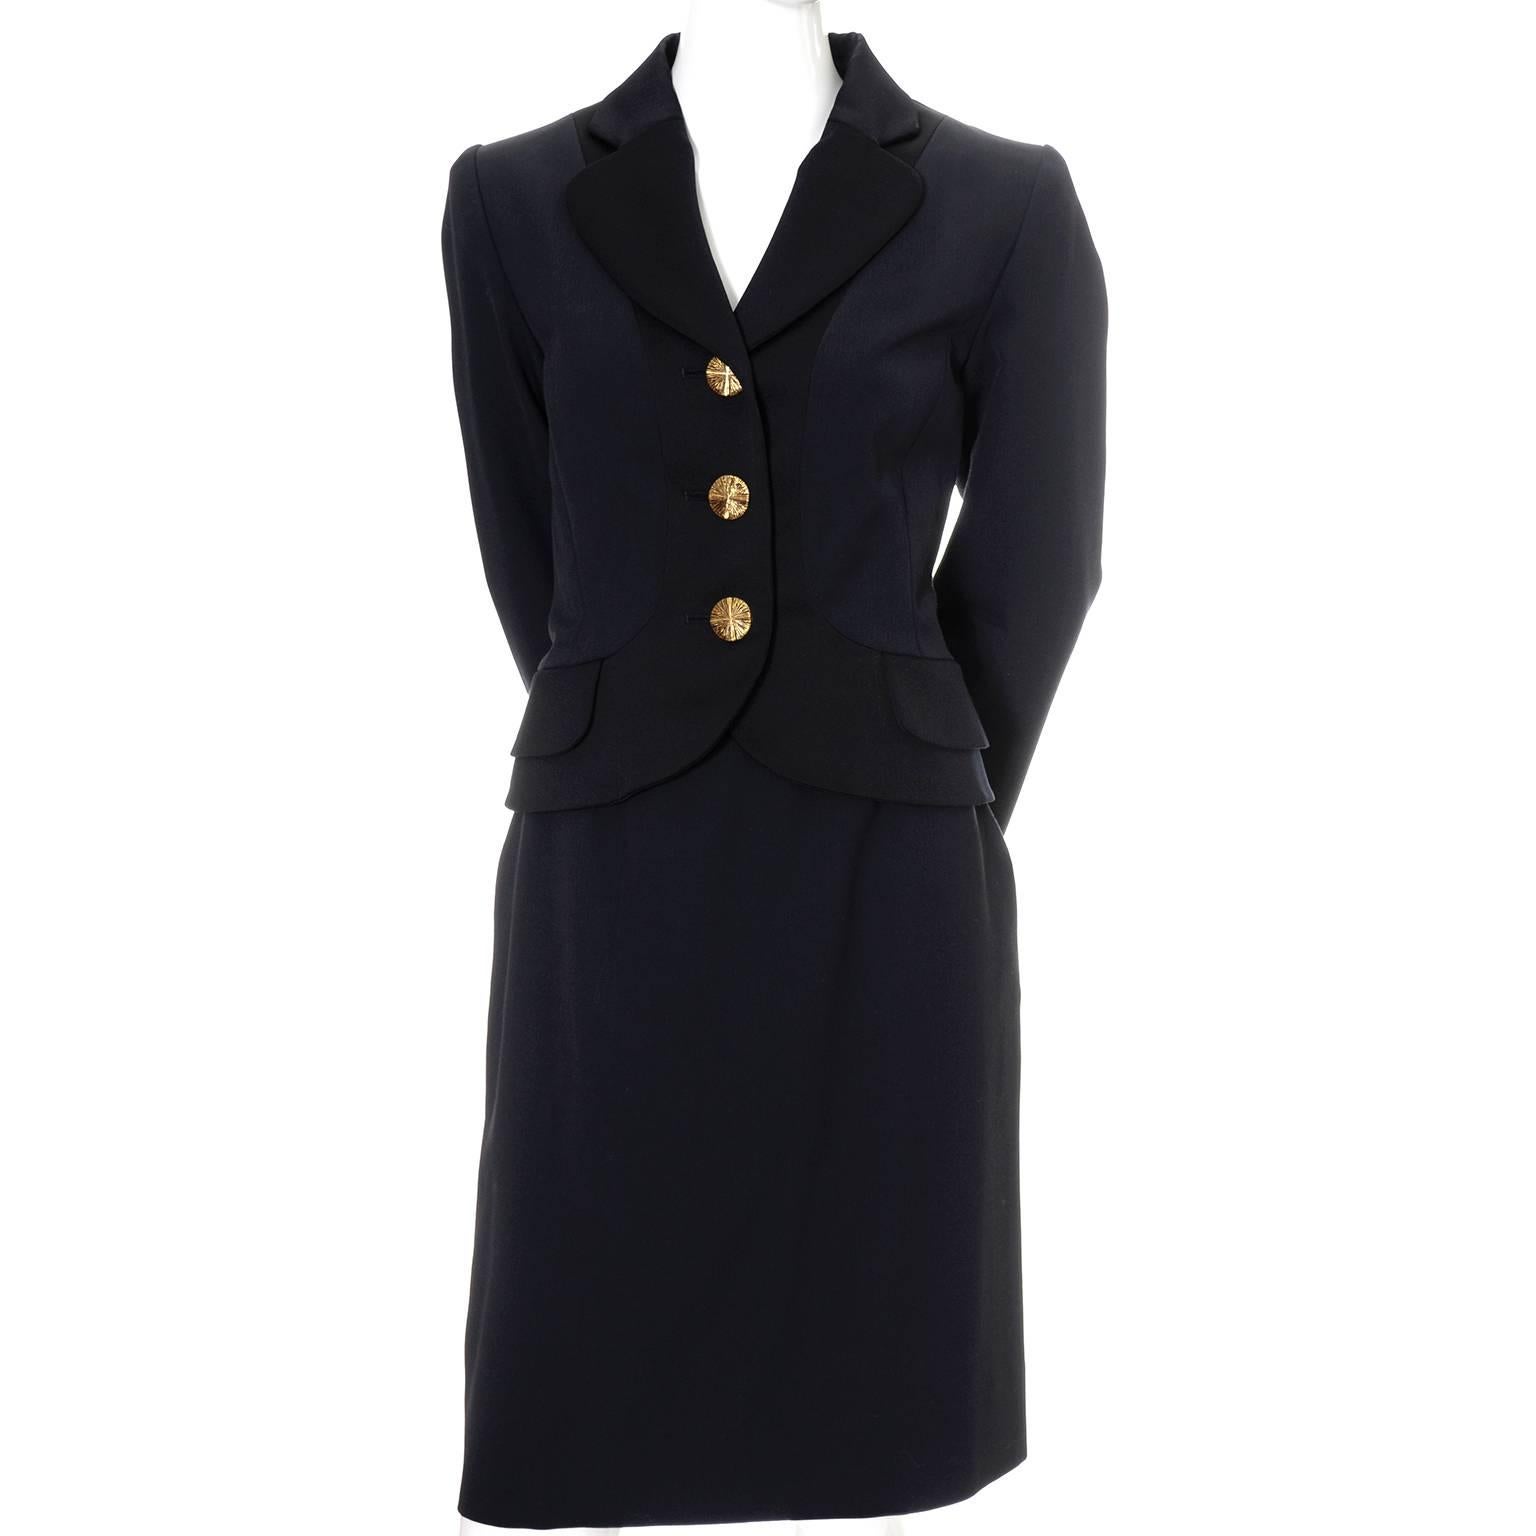 This gorgeous YSL vintage 2 piece skirt and blazer suit is made of a finely ribbed midnight blue wool crepe with black satin trim.  This Yves Saint Laurent Rive Gauche suit was made in the 1990's in France and is in as new condition.  The lined